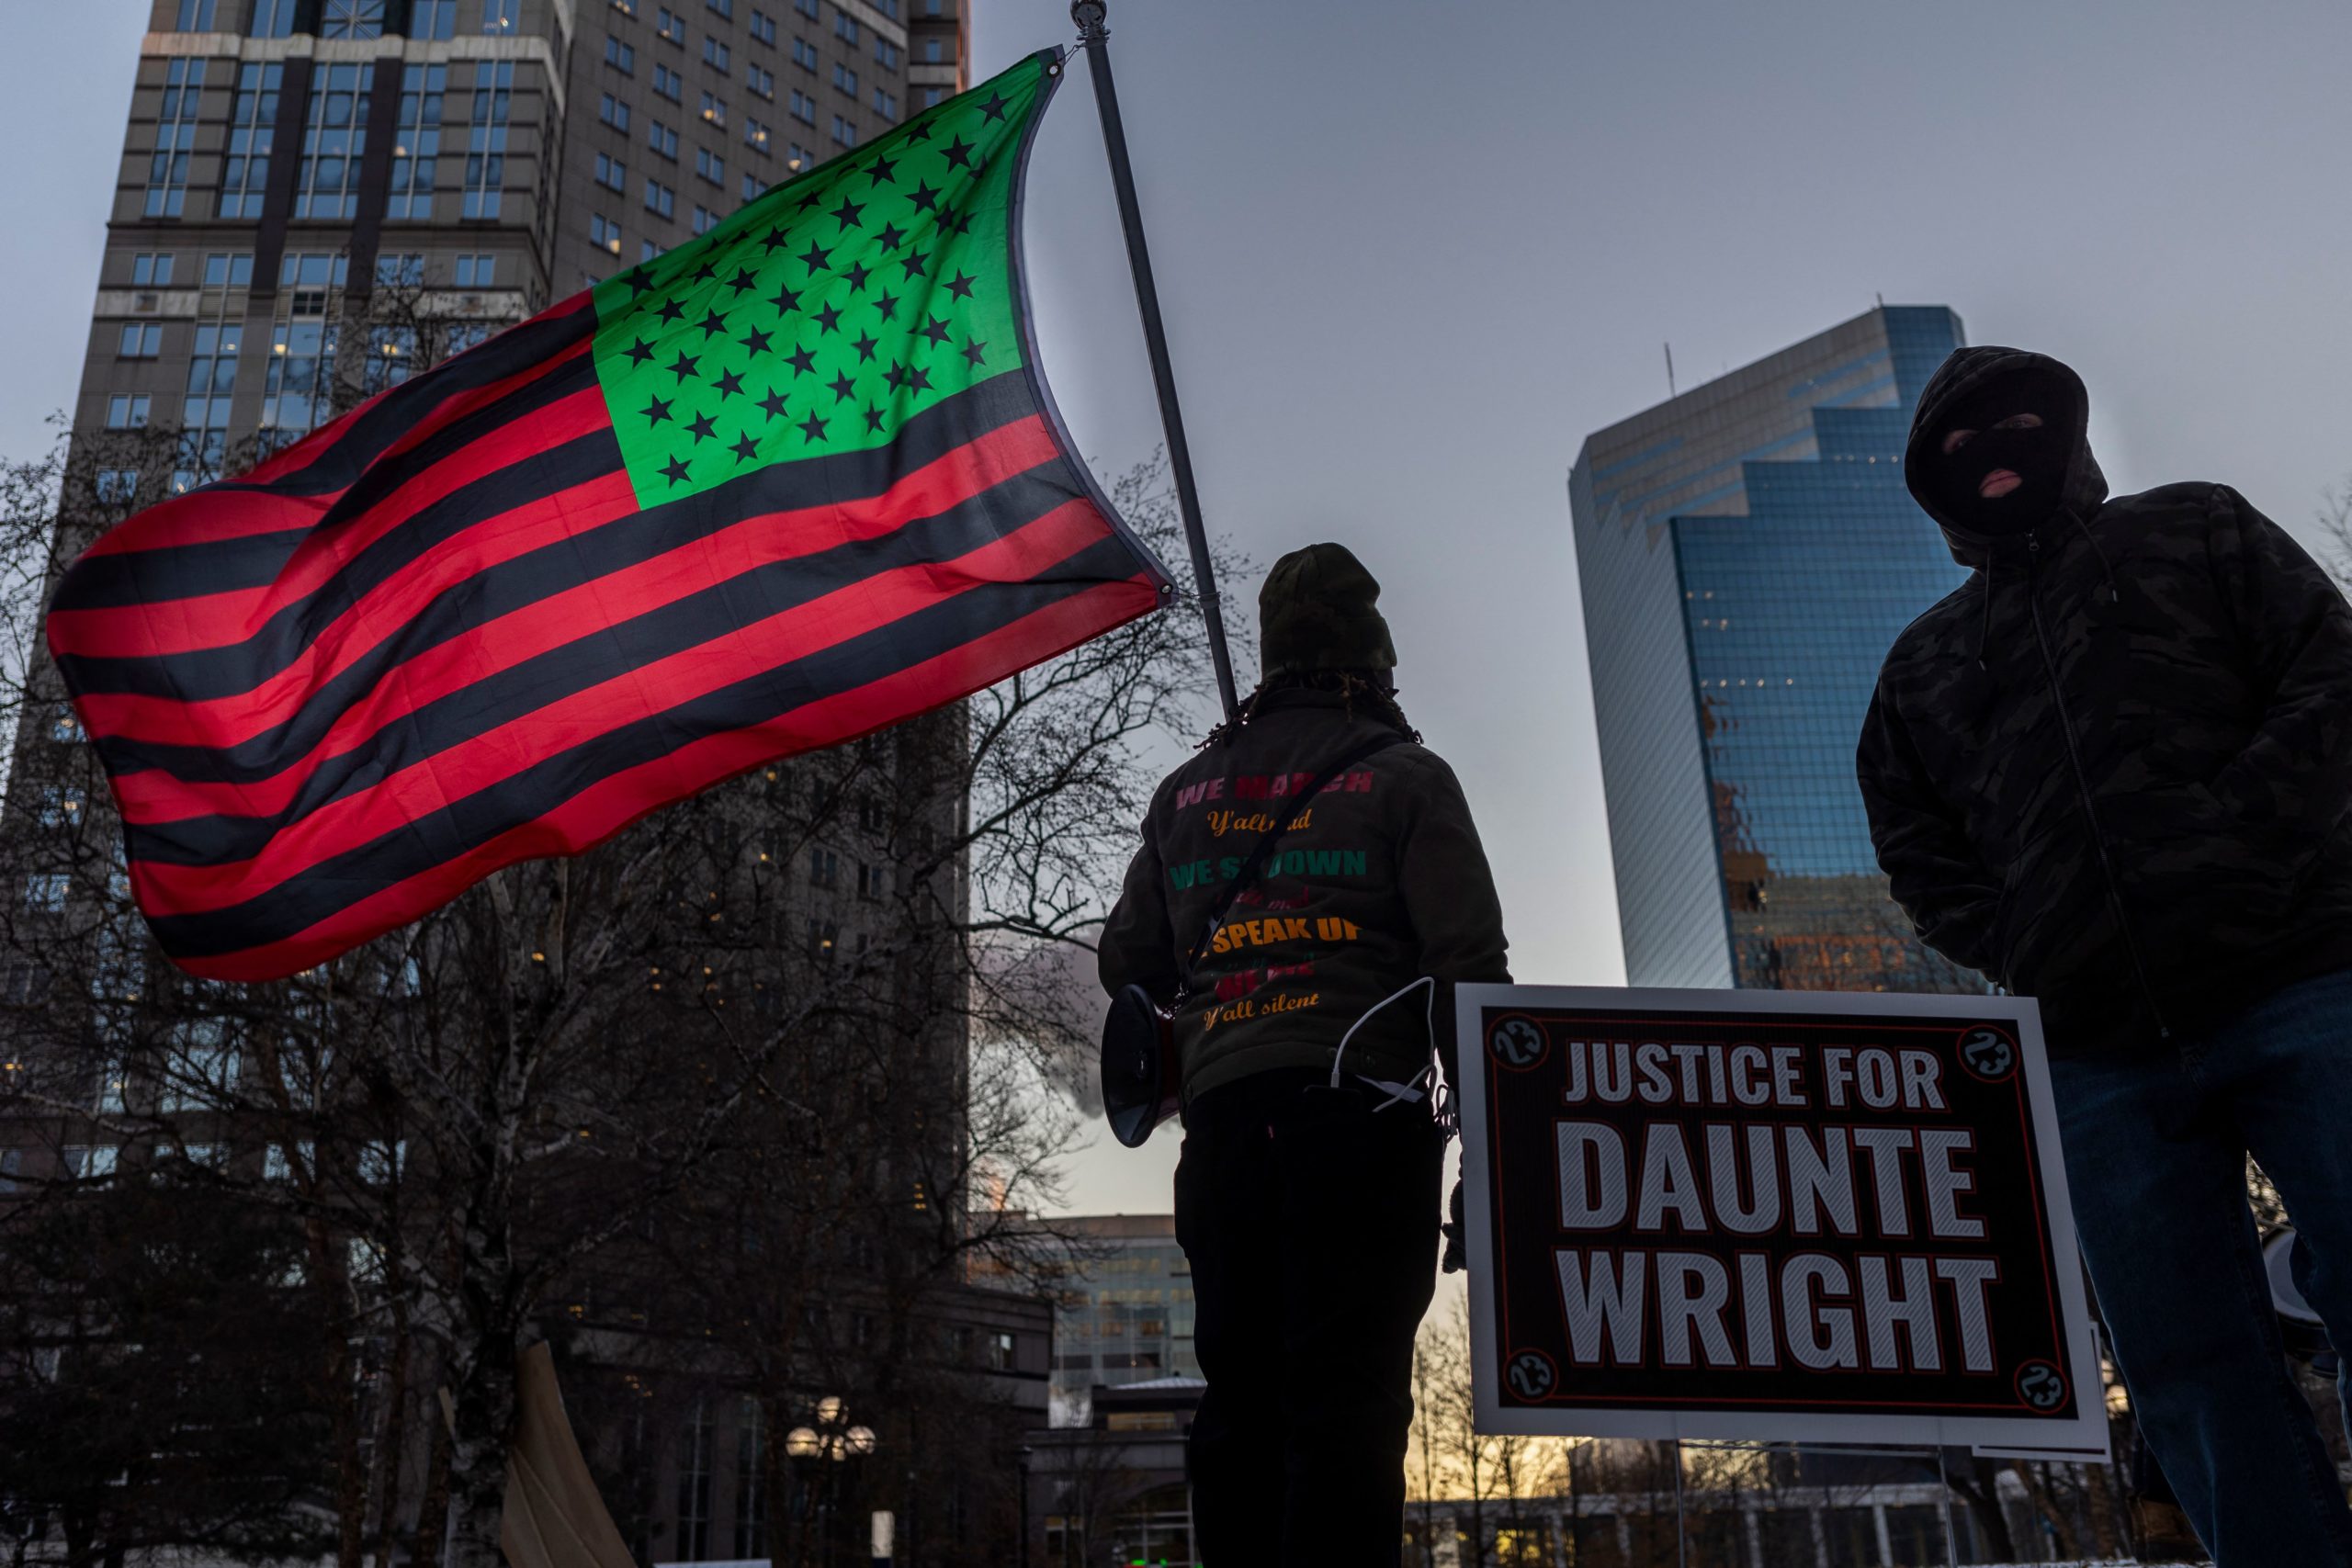 A man holds an African-American US National flag as people wait for the verdict in Kim Potter's trial over the fatal shooting of Daunte Wright, outside the Hennepin County Courthouse in Minneapolis, Minnesota on December 20, 2021. - Kim Potter, 49, is charged with first degree manslaughter over the fatal shooting of Daunte Wright, 20, in Brooklyn Center, a suburb of Minneapolis, Minnesota, in April 2021. (Photo by Kerem Yucel / AFP) (Photo by KEREM YUCEL/AFP via Getty Images)